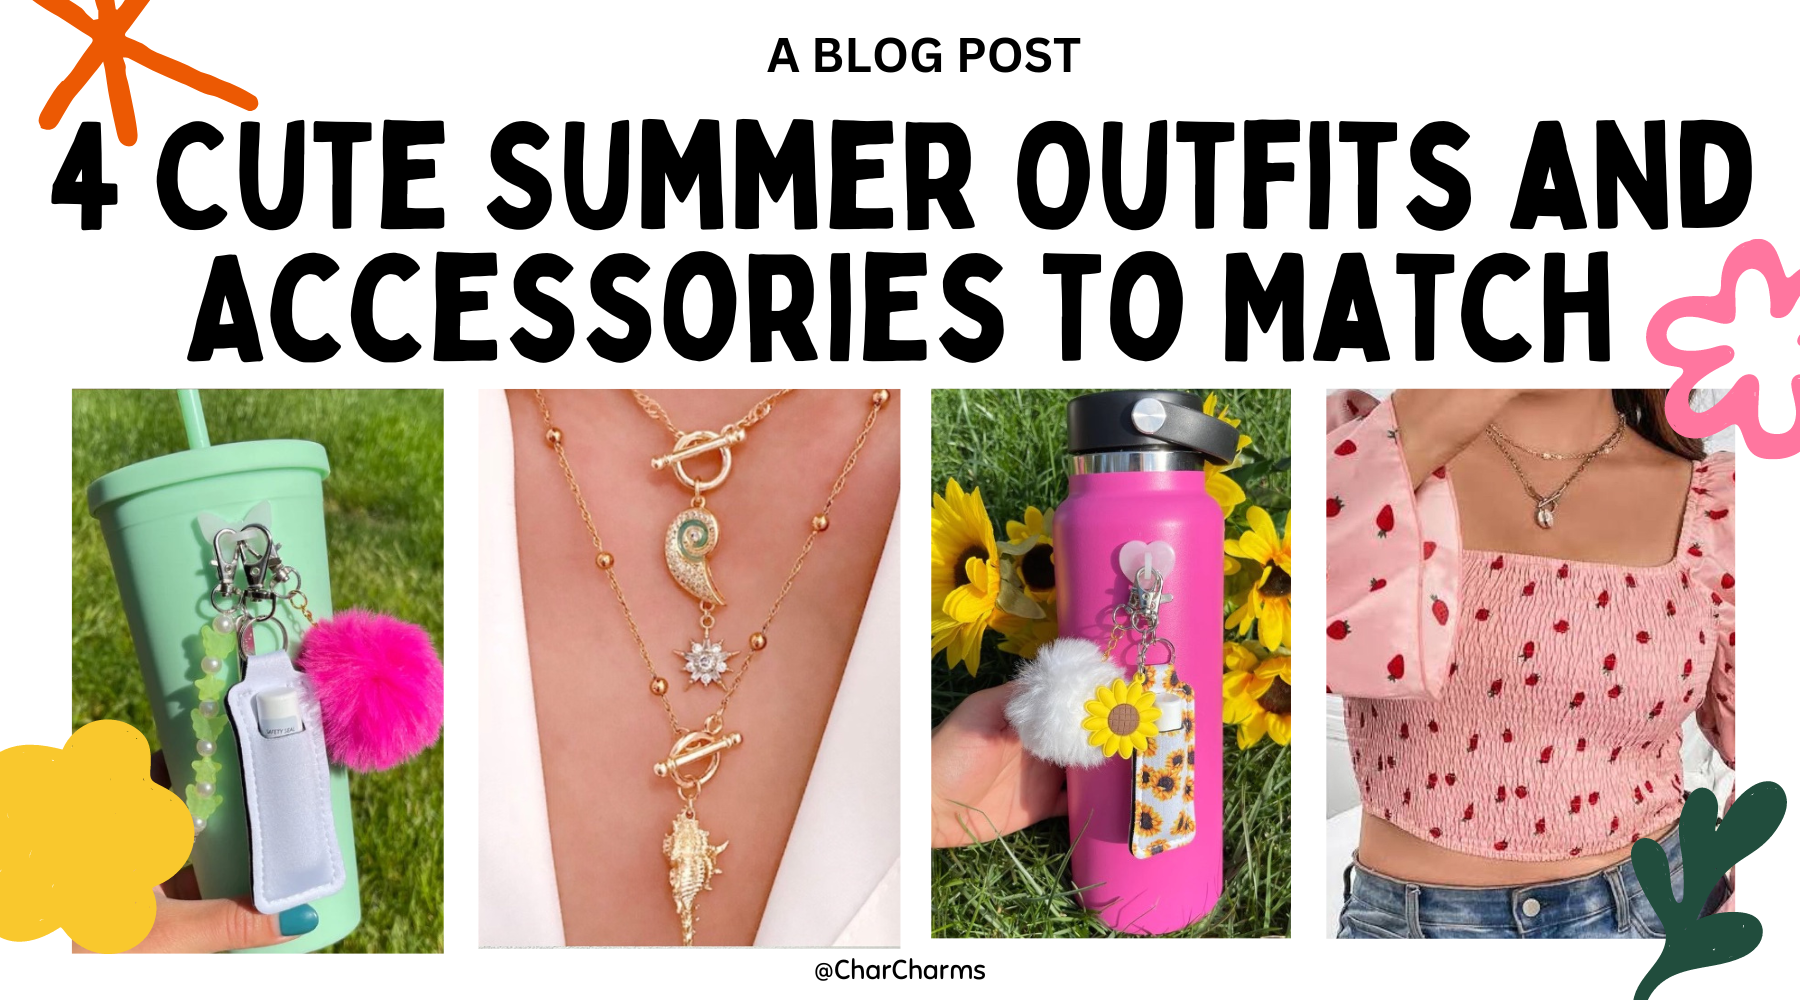 4 Cute Summer Outfit Ideas with Accessories